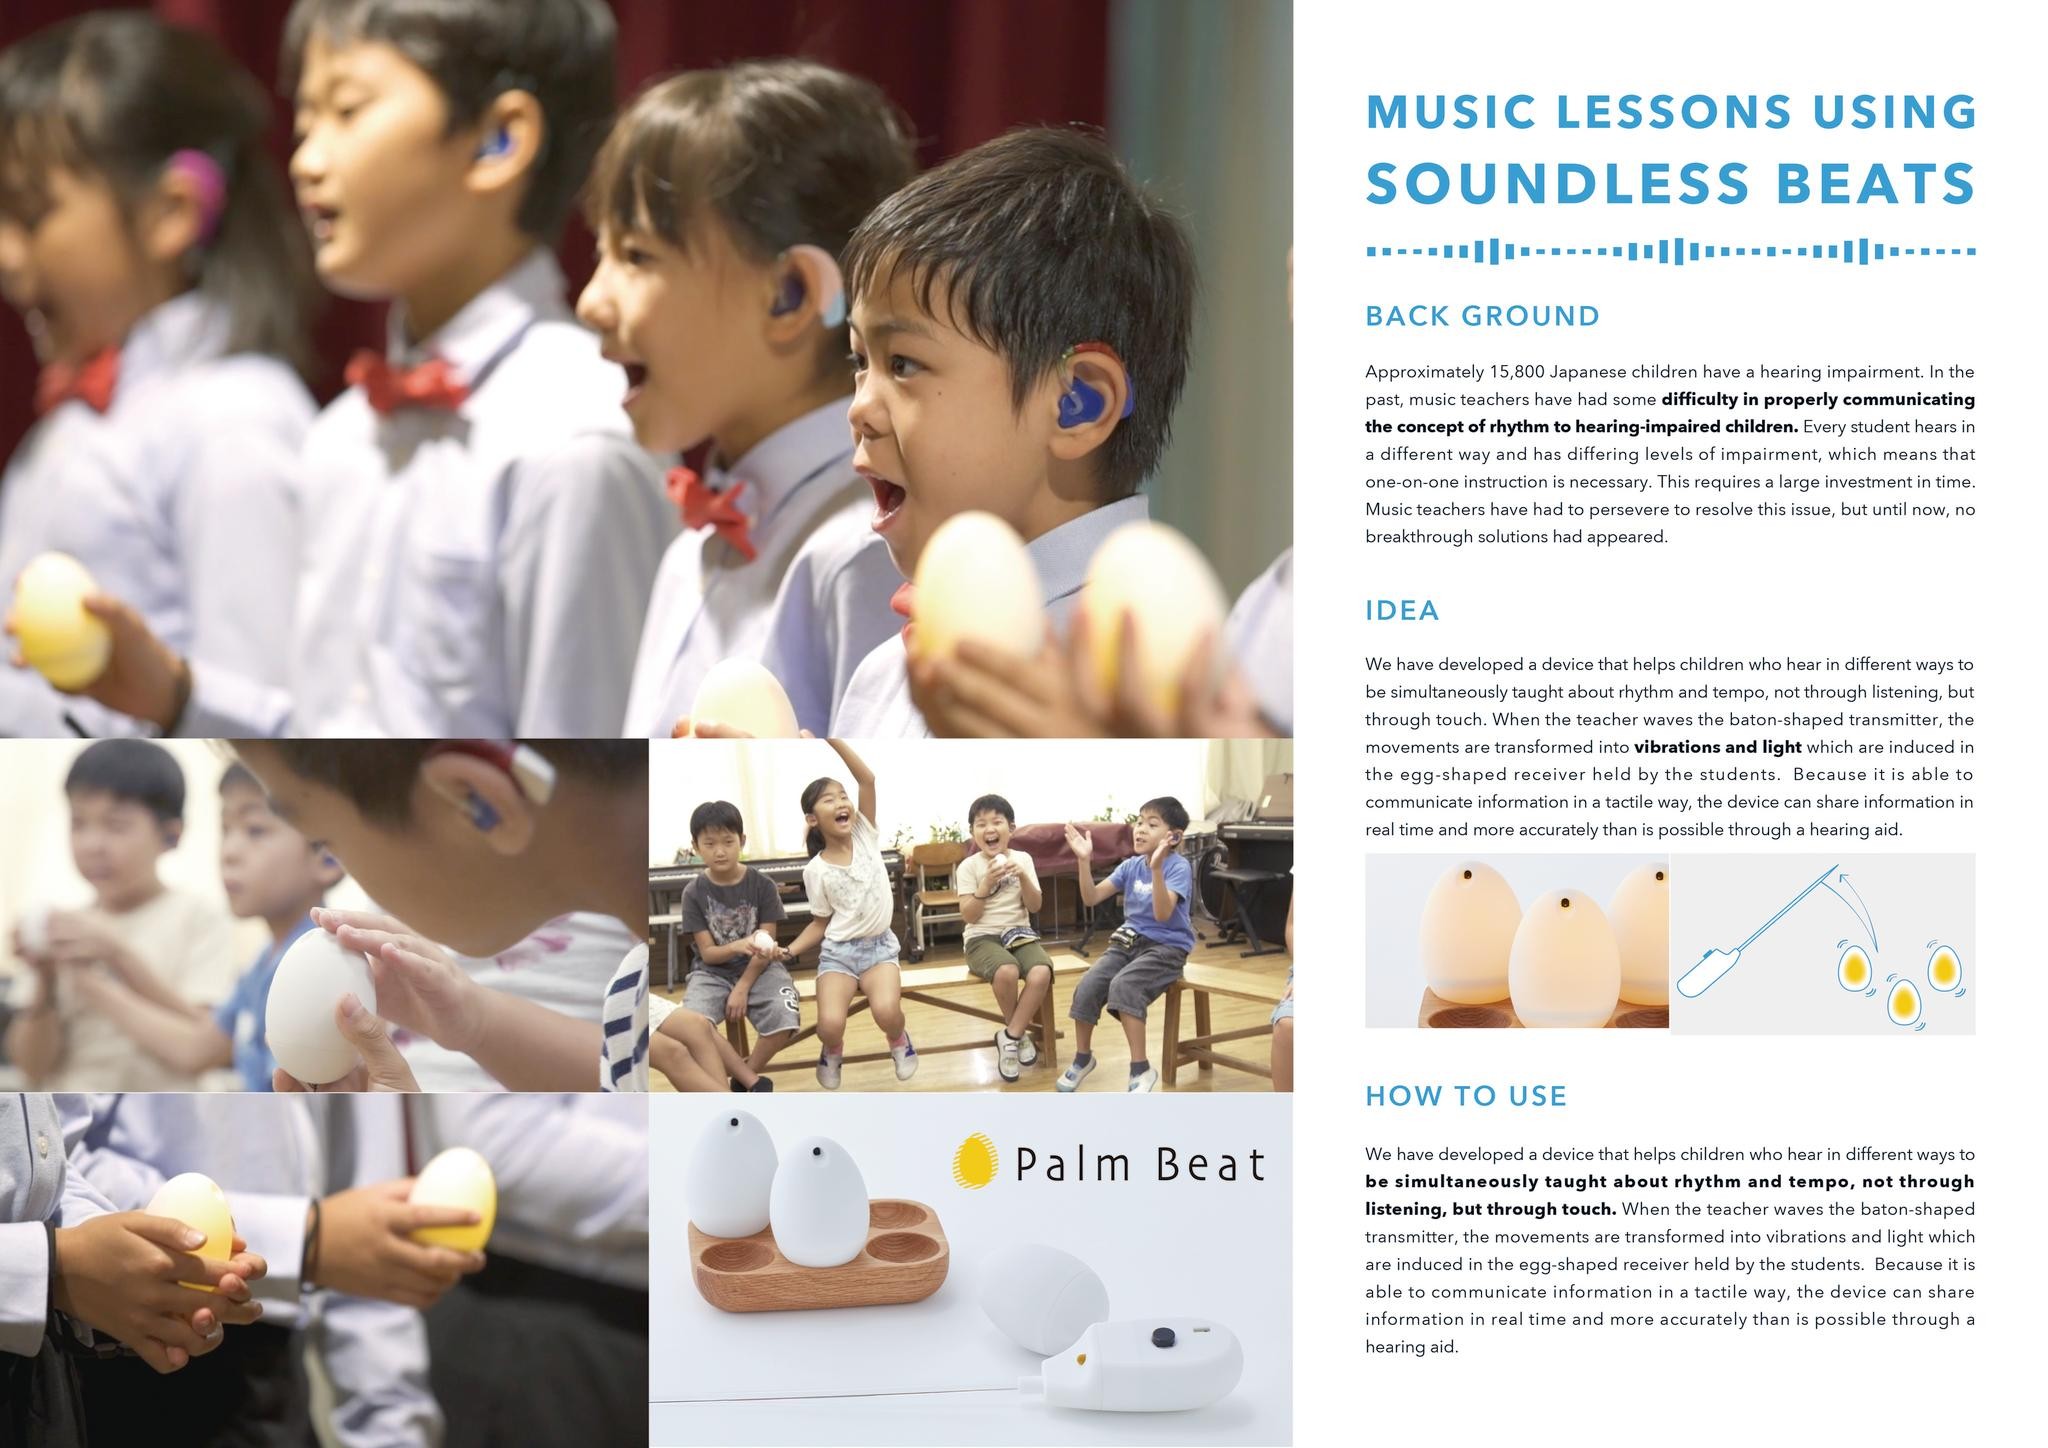 MUSIC LESSONS USING SOUNDLESS BEATS